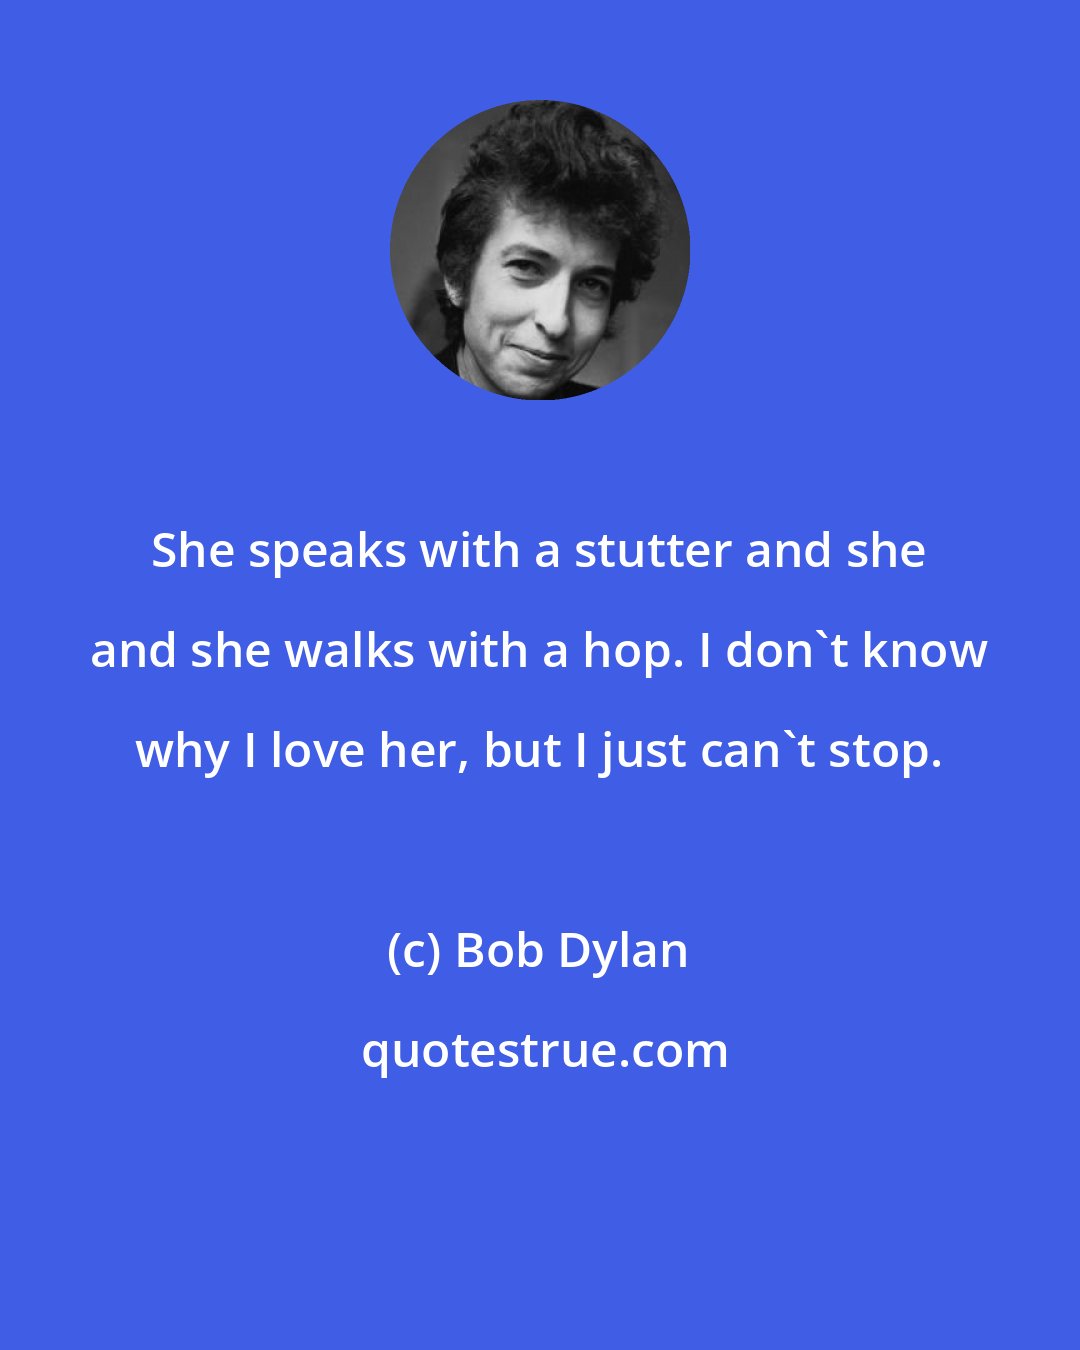 Bob Dylan: She speaks with a stutter and she and she walks with a hop. I don't know why I love her, but I just can't stop.